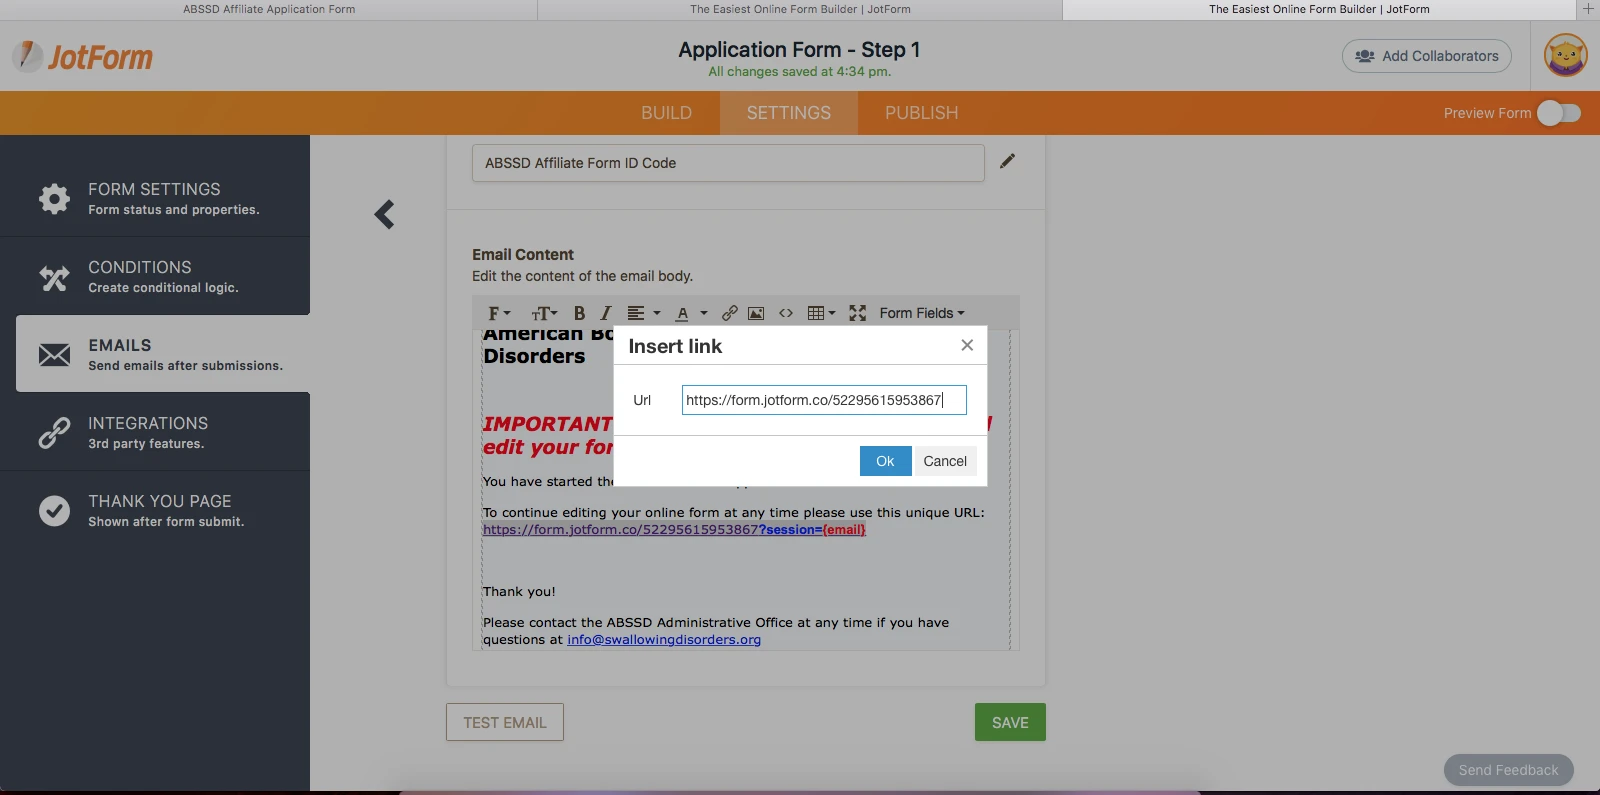 Save forms and continue later feature is not working Image 1 Screenshot 20